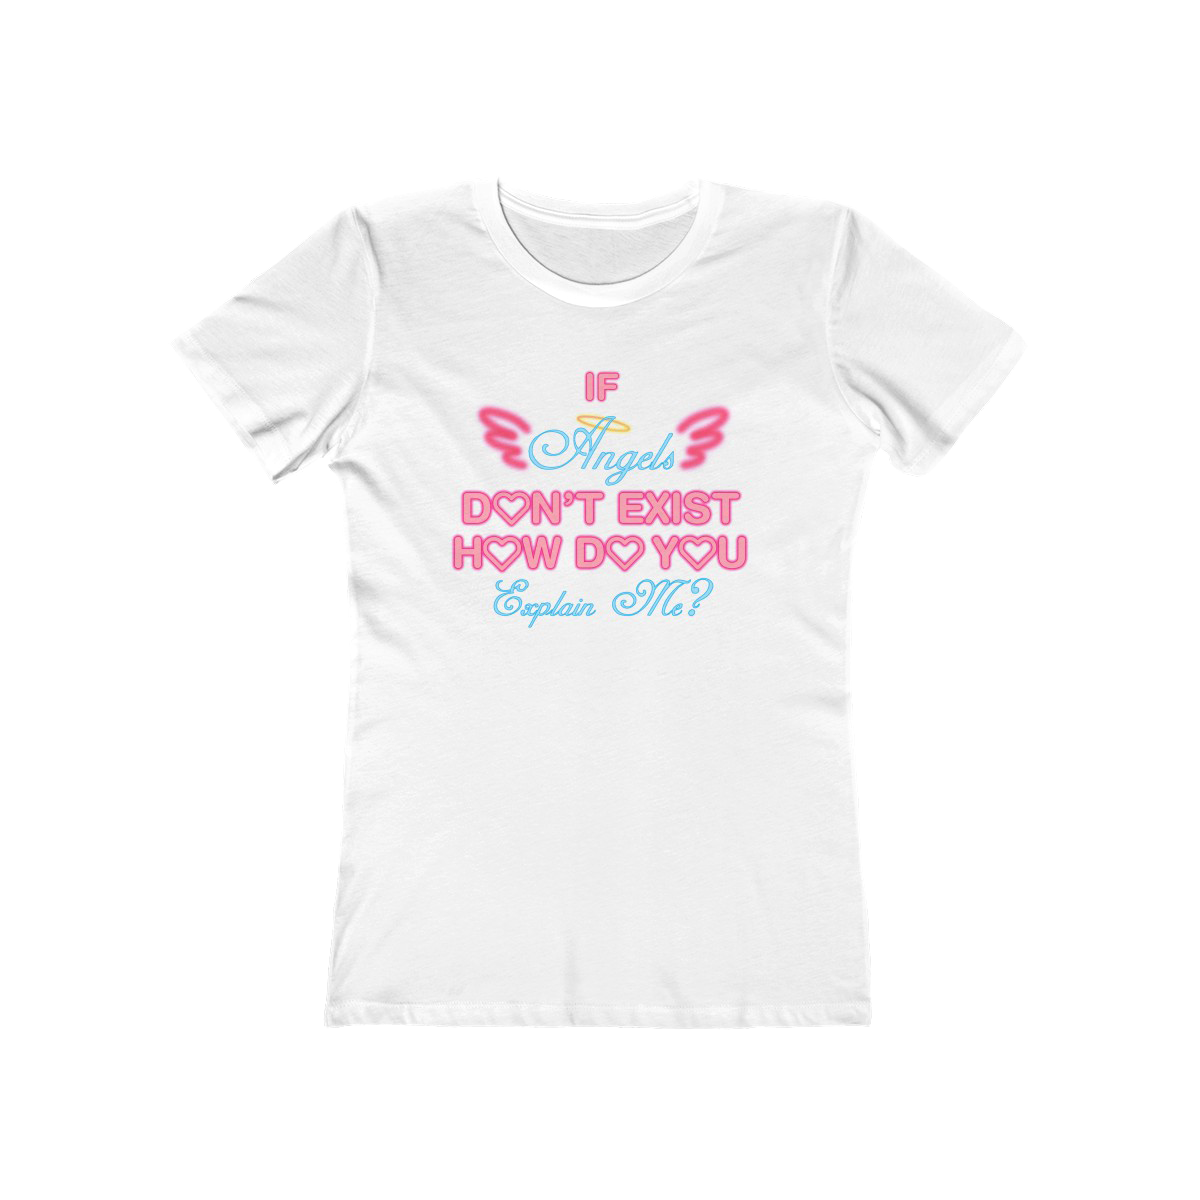 ANGELS EXIST GIRLY TEE